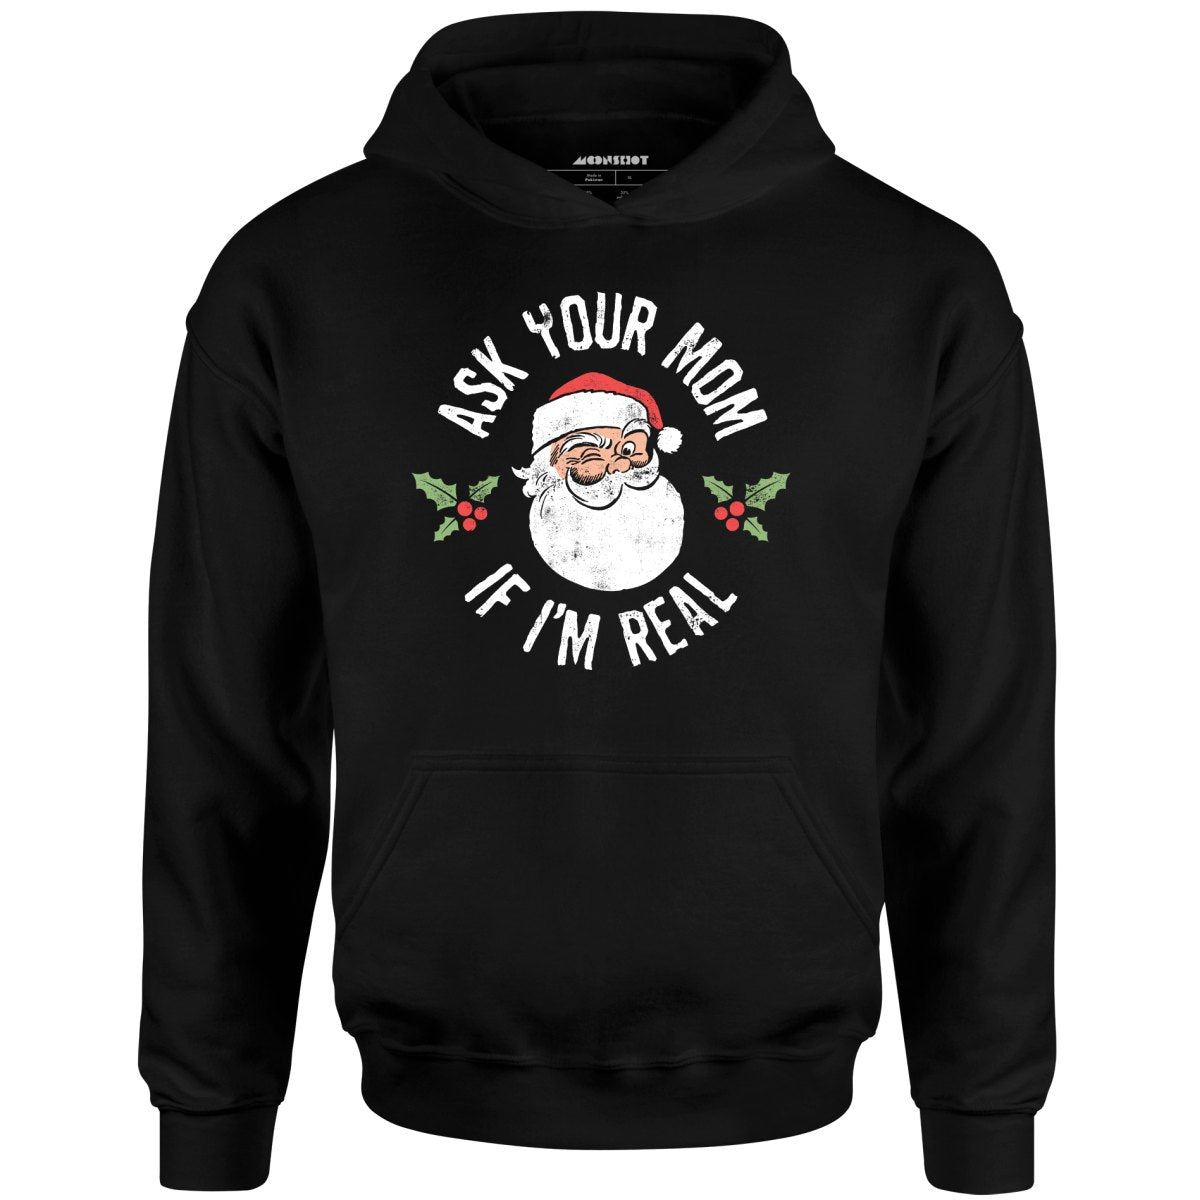 Ask Your Mom if I'm Real - Unisex Hoodie